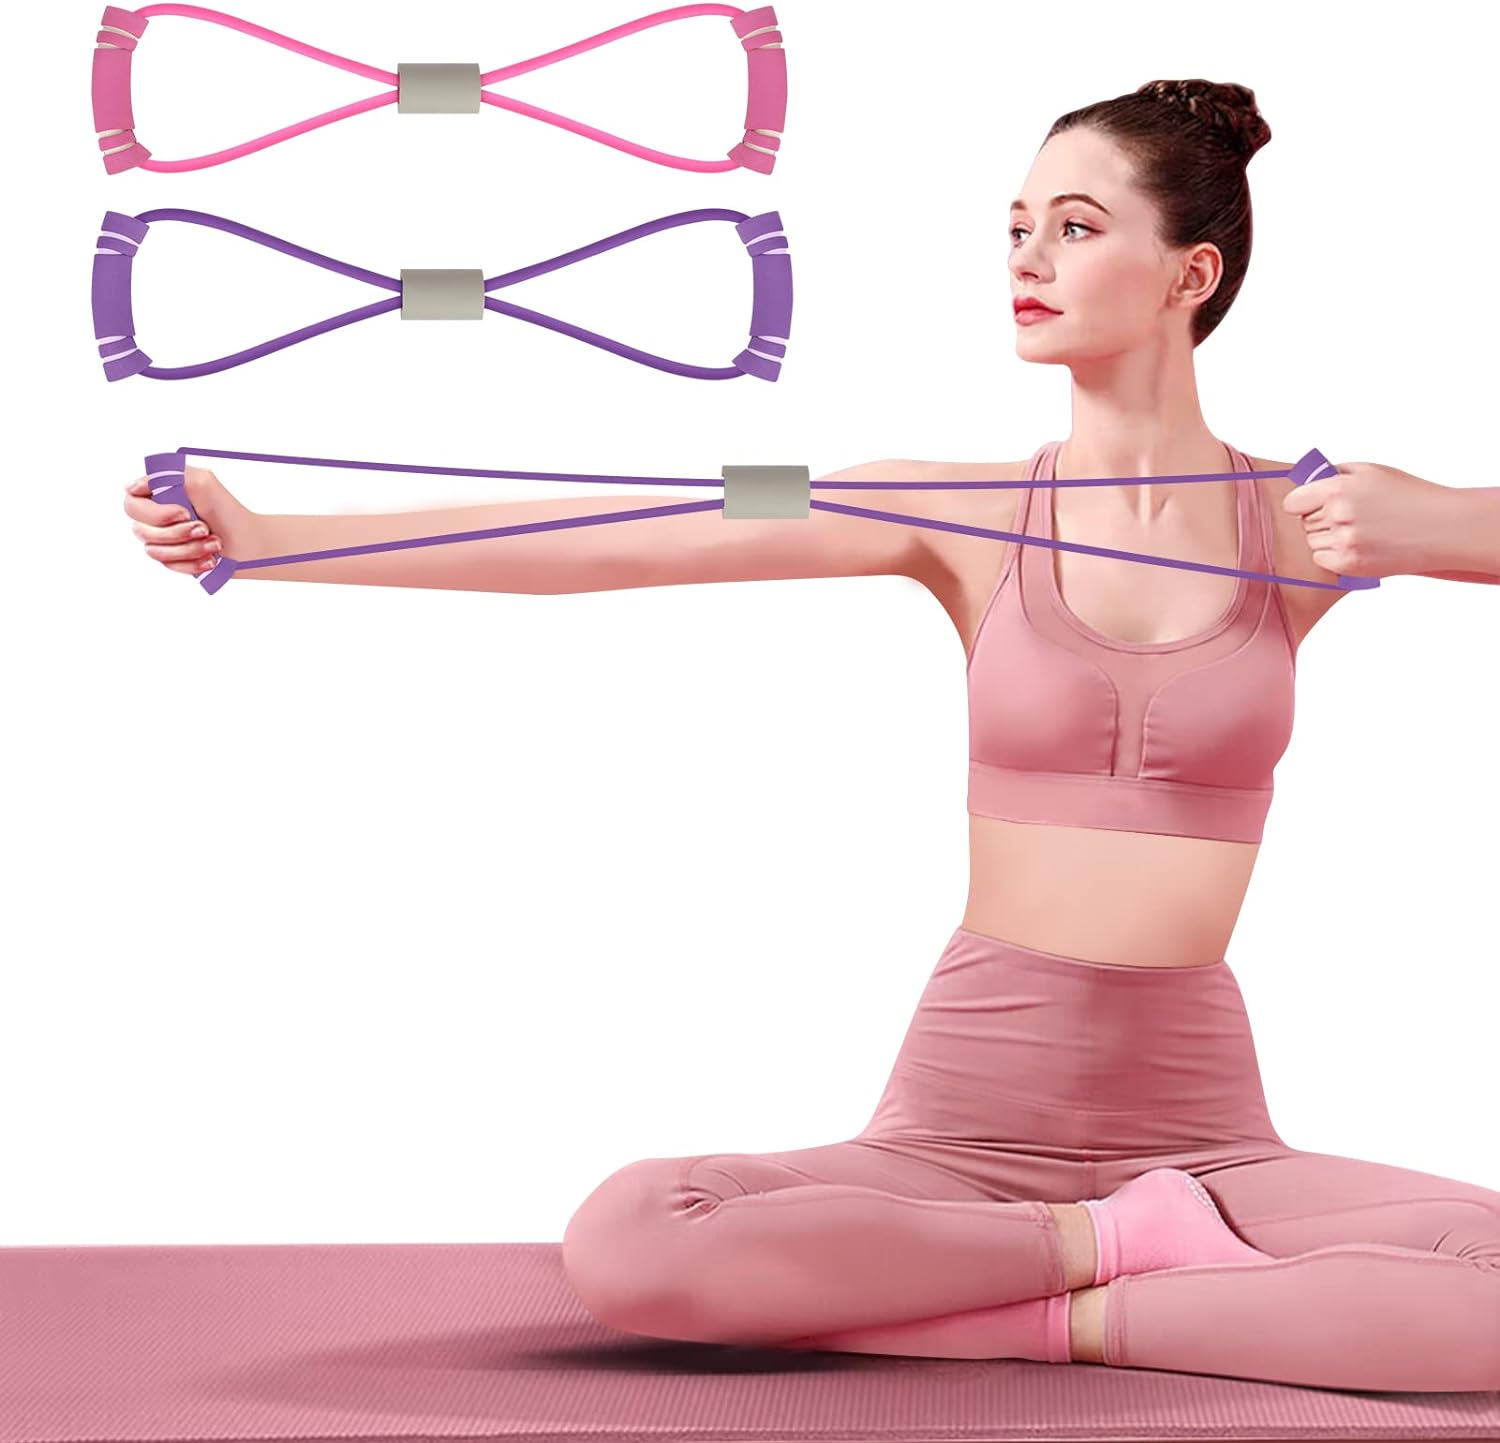 FYY Figure 8 Resistance Bands, Yoga Resistance Band Stretch Fitness Band, Pull Rope, Chest Arm and Shoulder Stretch Bands Exercise Equipment for Home Workout, Physical Therapy, Strength Training